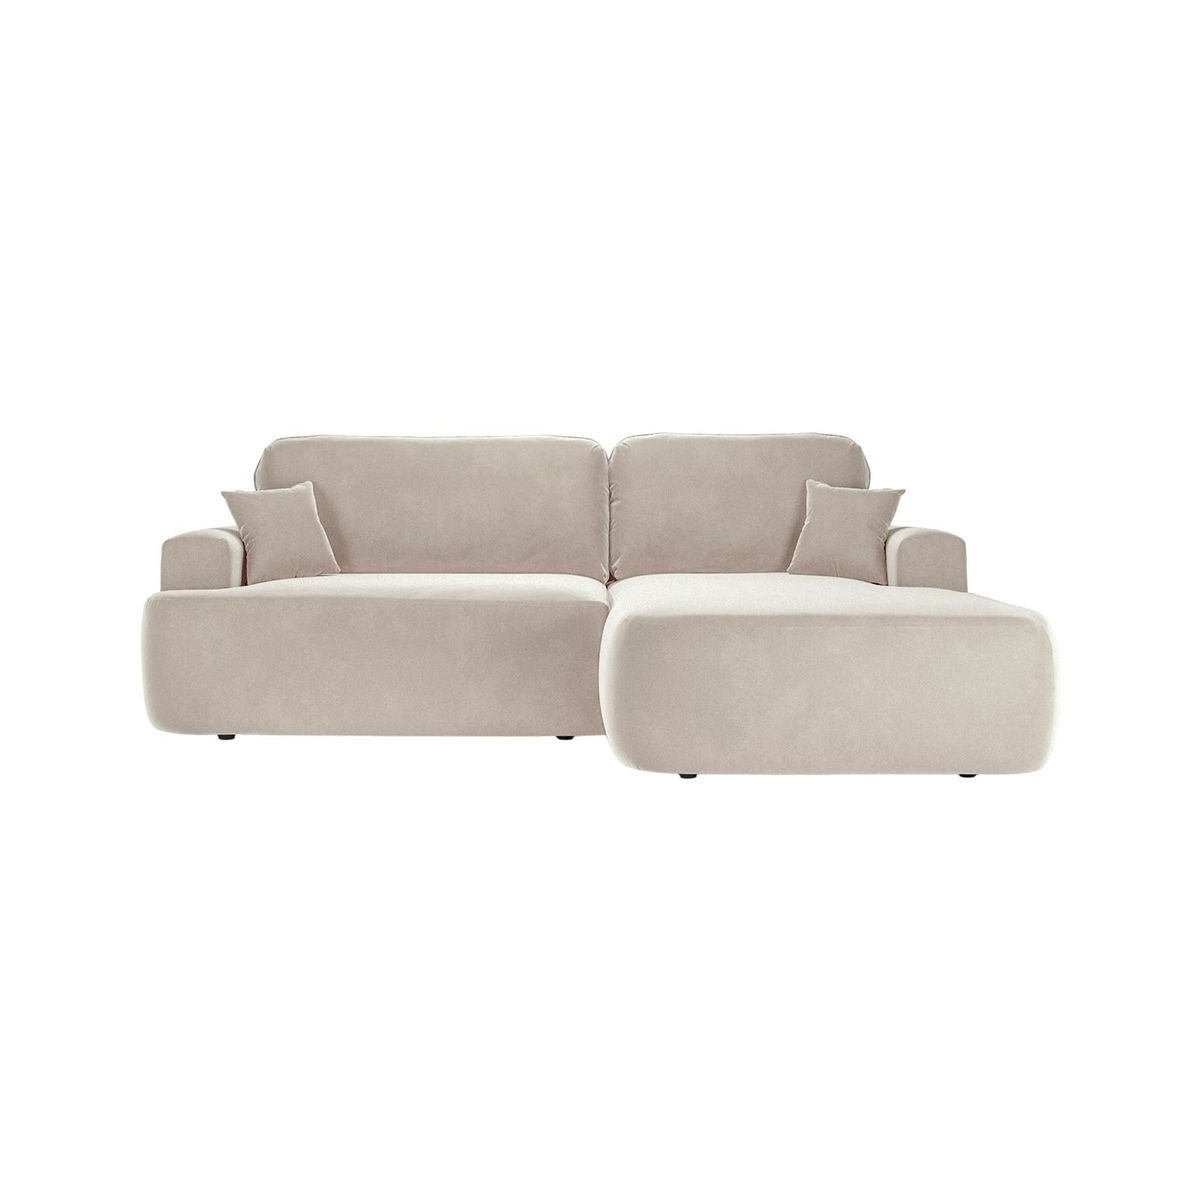 Review: Versatile Contemporary Globe Corner Sofa Bed From SLF24 - Tidylife